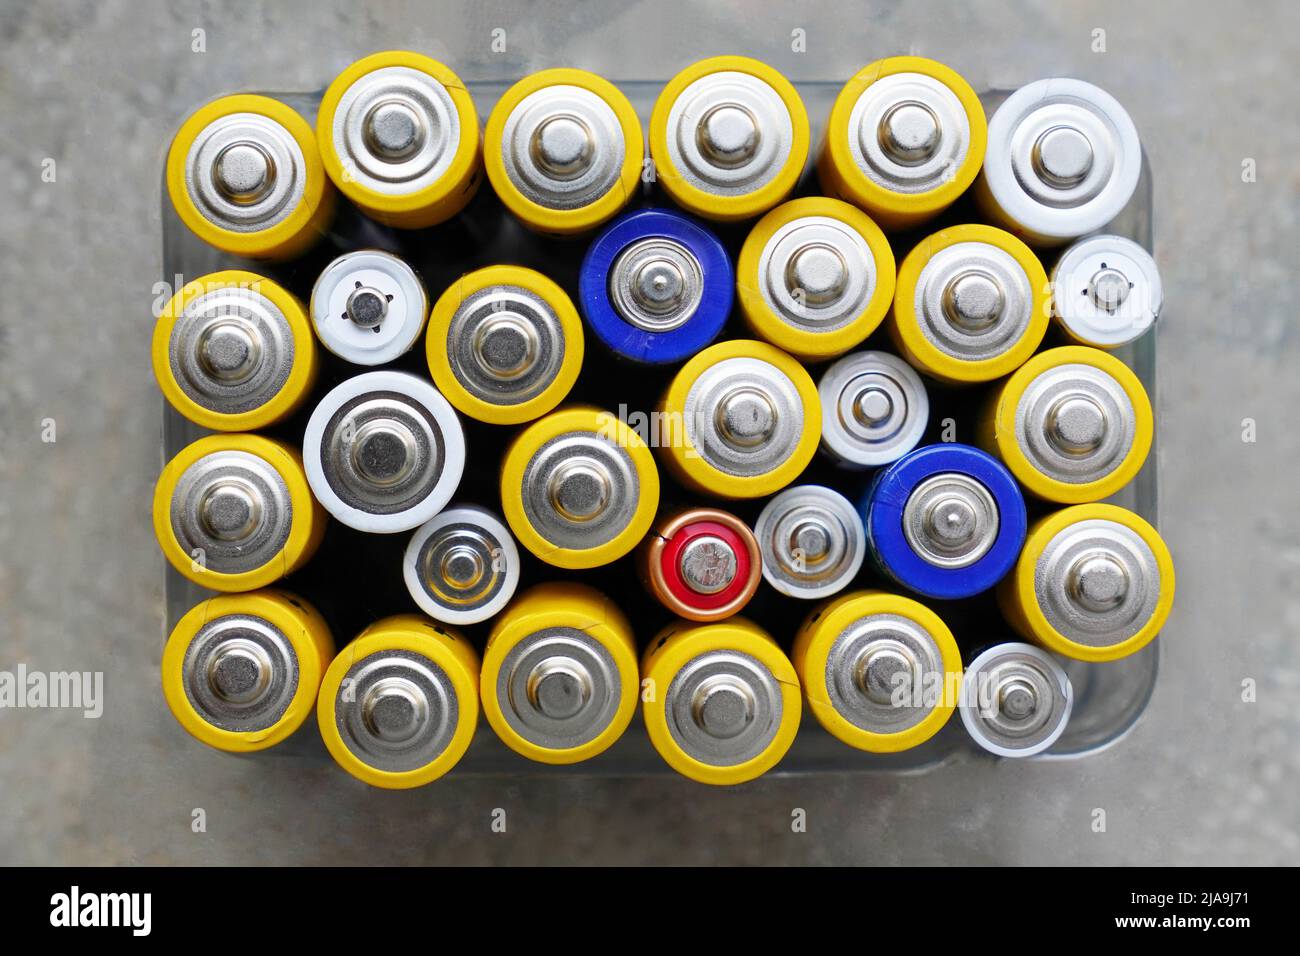 collecting used alkaline batteries for recycling Stock Photo